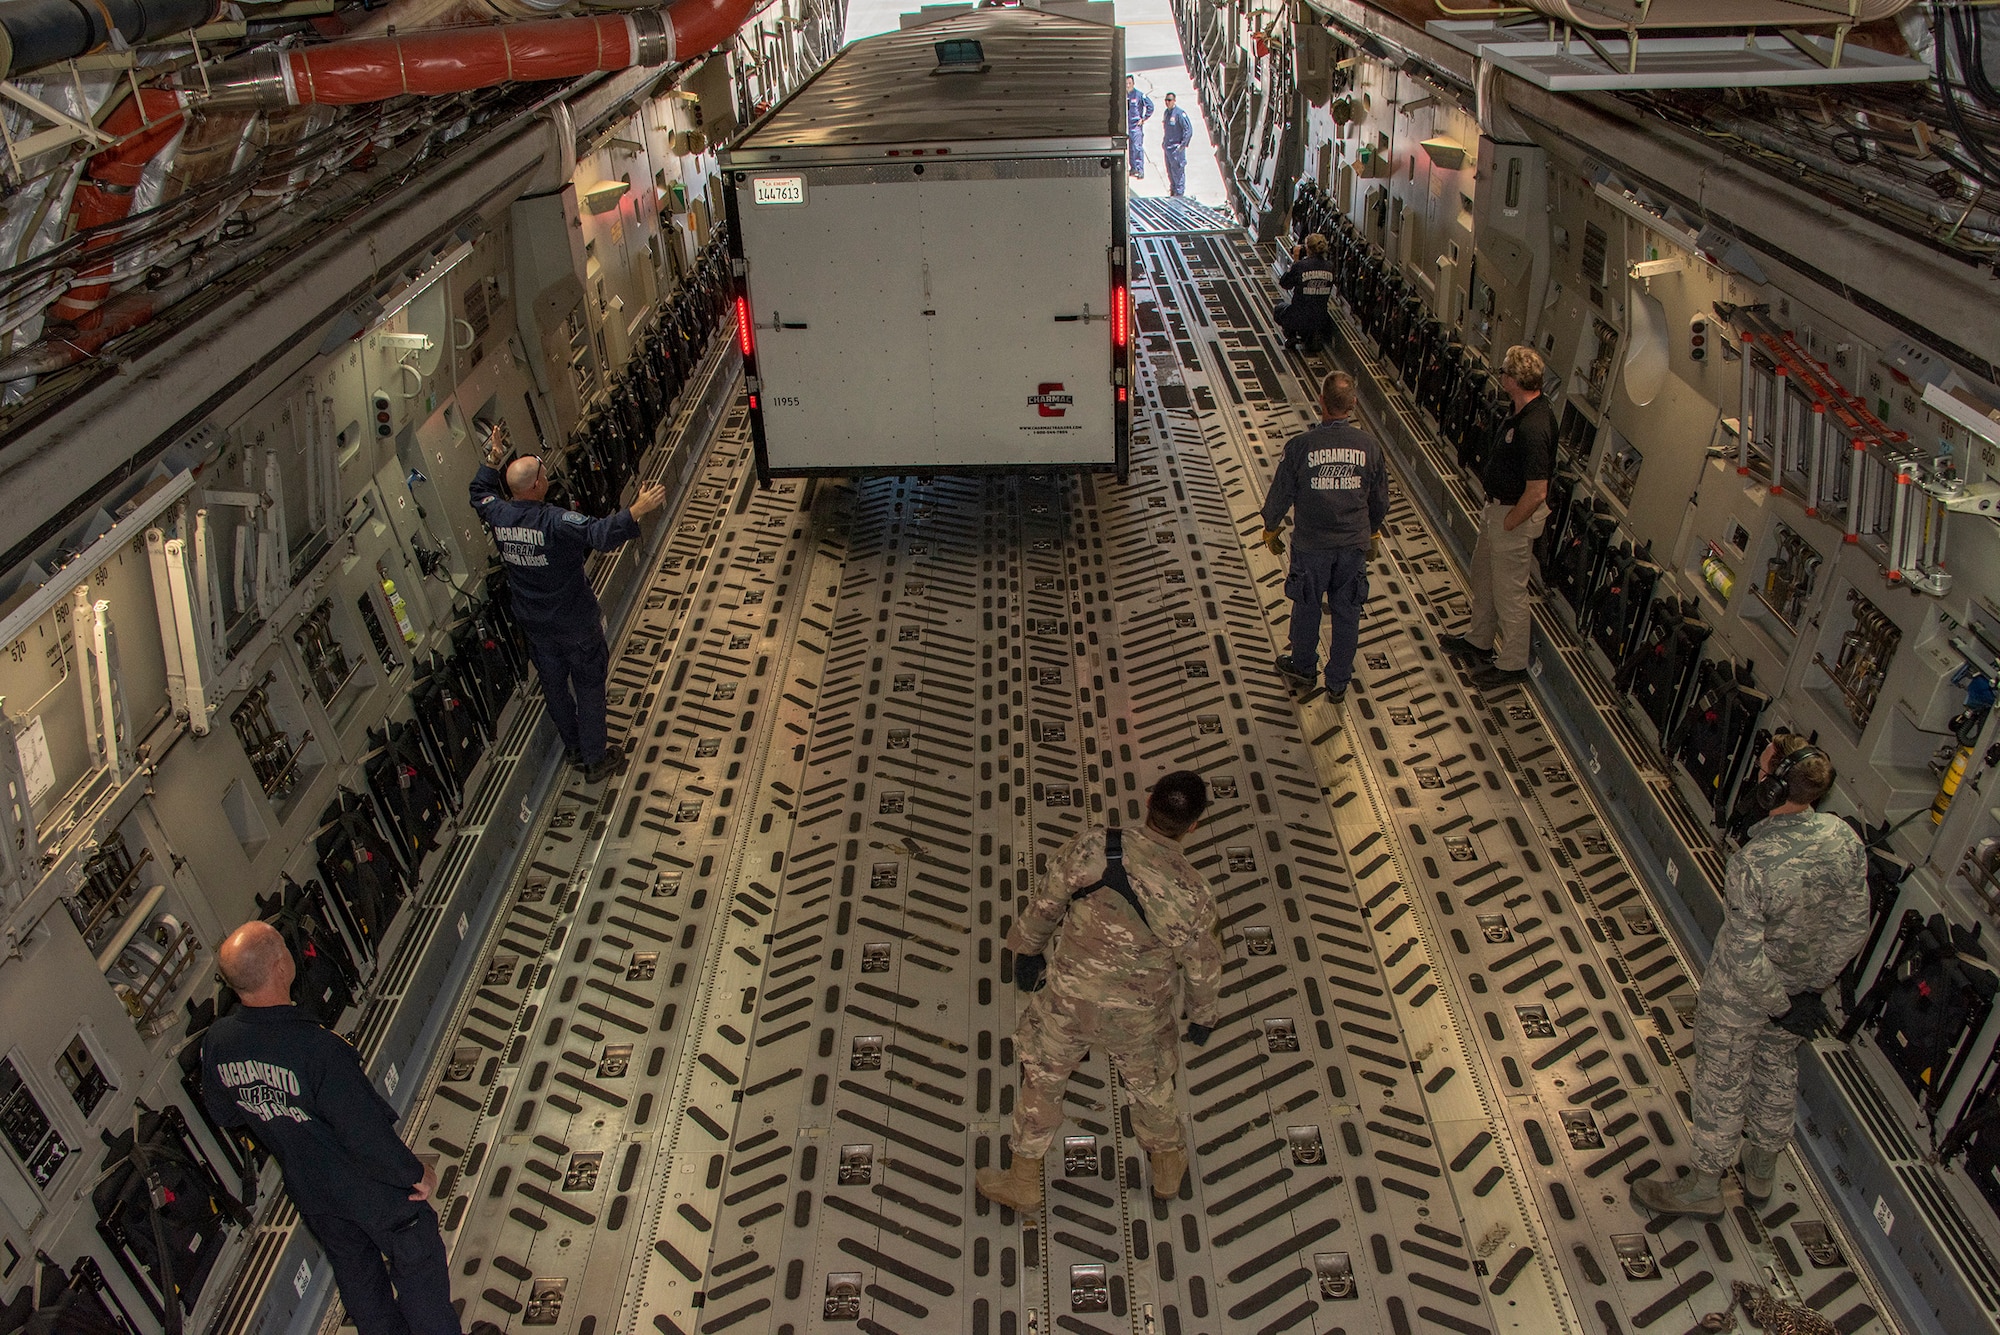 California Urban Search and Rescue Task Force 7 guides a cargo transport trailer into place inside a C-17 Globemaster III during a joint inspection and logistics drill conducted with 60th Aerial Port Squadron personnel, June 13, 2019 at Travis Air Force Base, California. The annual training helps members of CA TF-7 learn about the process, governing and directives and ensures cargo is safe before loading onto an aircraft.  (U.S. Air Force photo by Heide Couch)